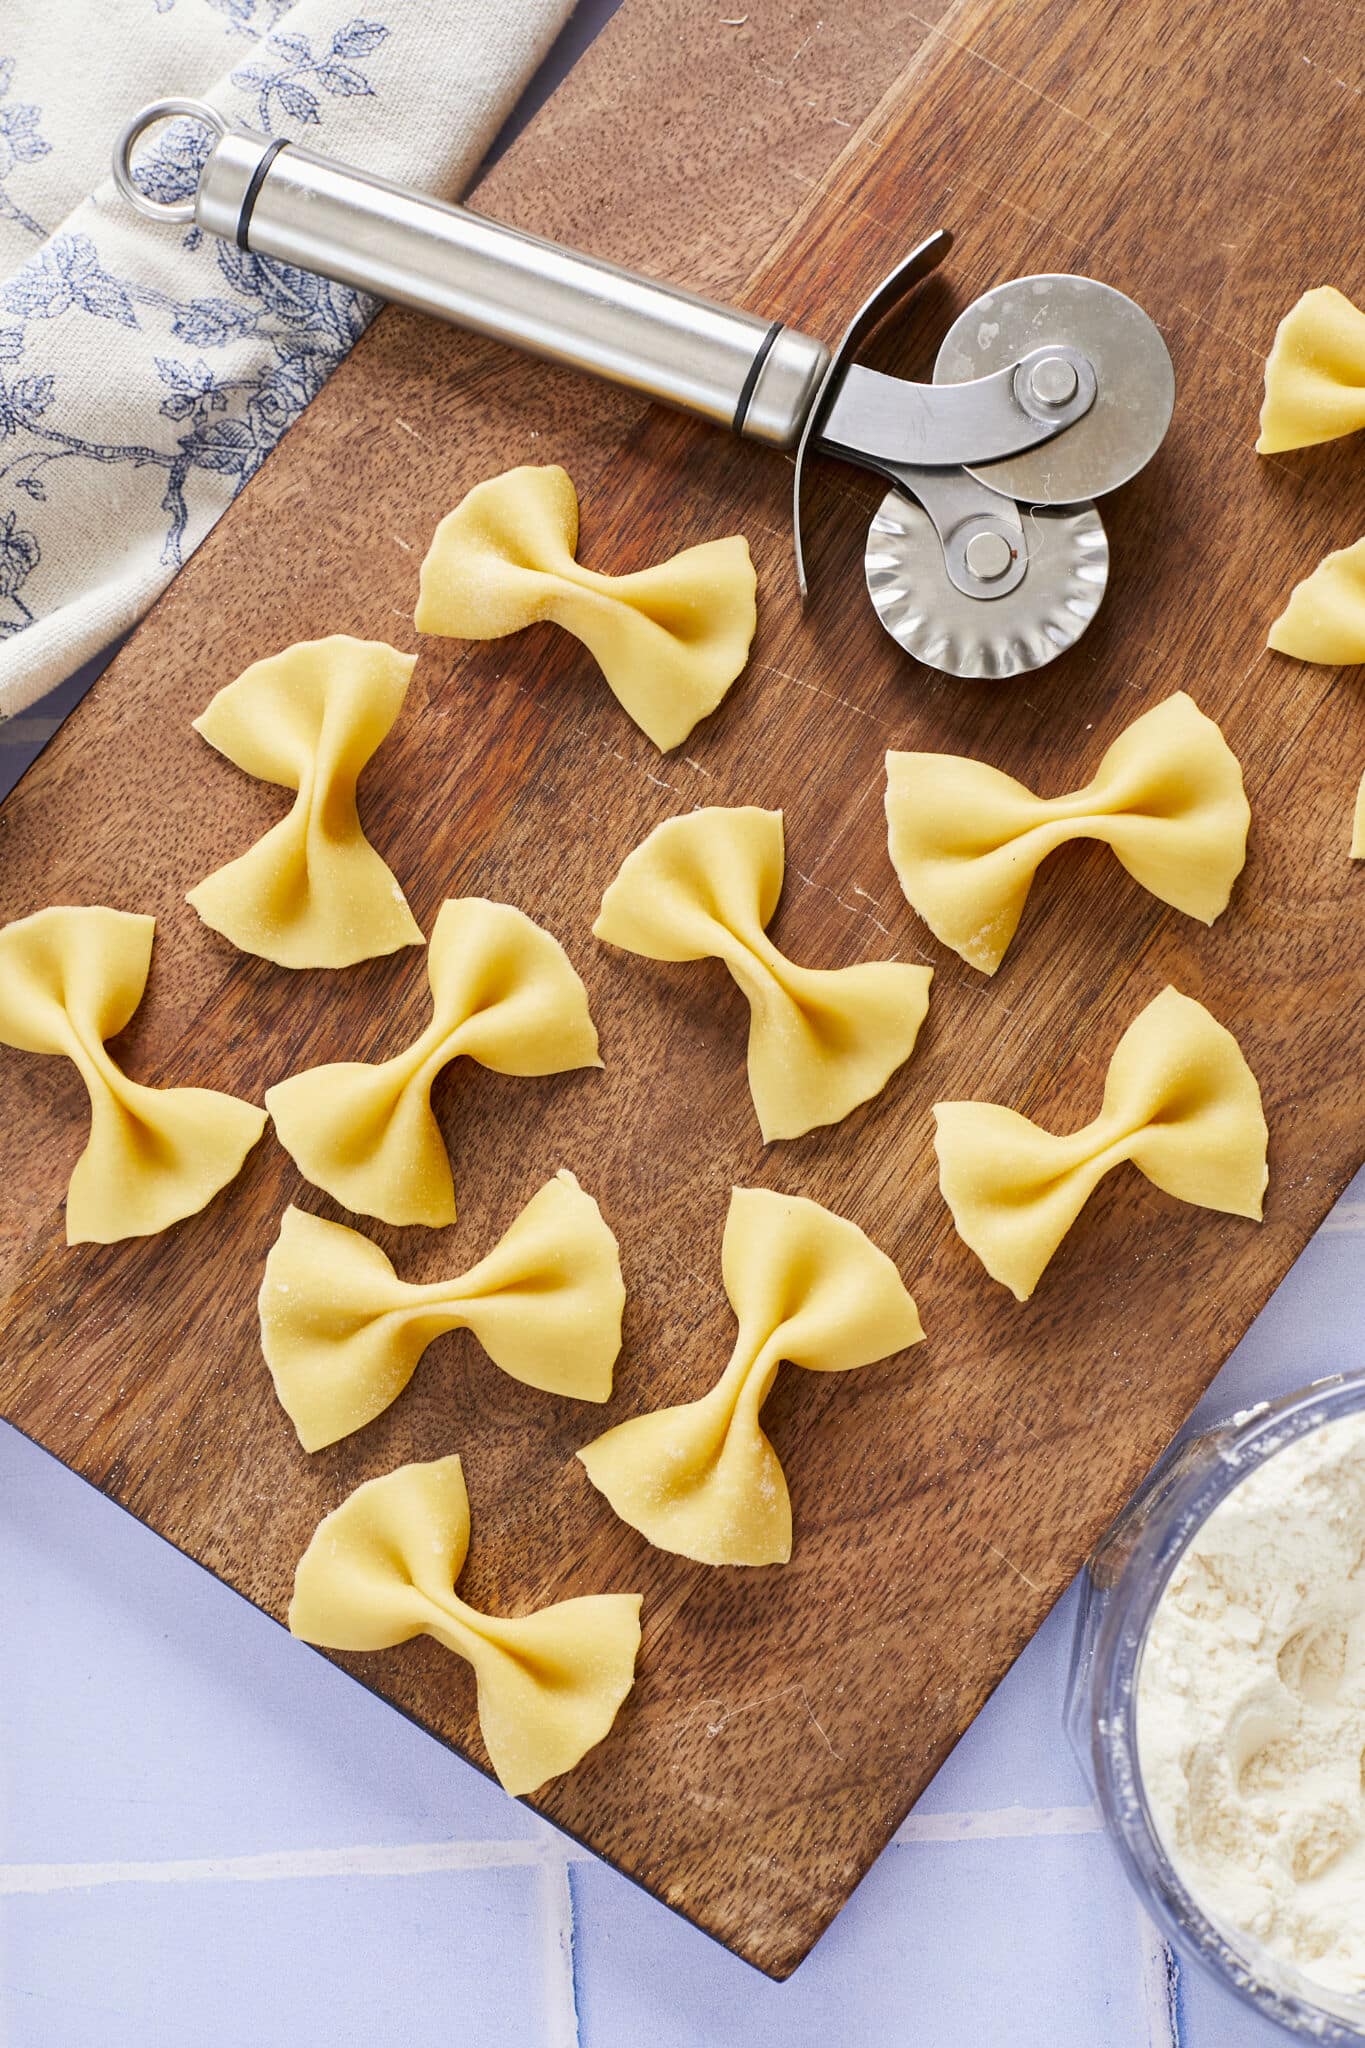 Butterfly-shaped Farfalle Pasta with perfect crevasses and fluted edges is drying on a wooden board with a fluted pasta cutter. A bowl of extra flour is on the side. 